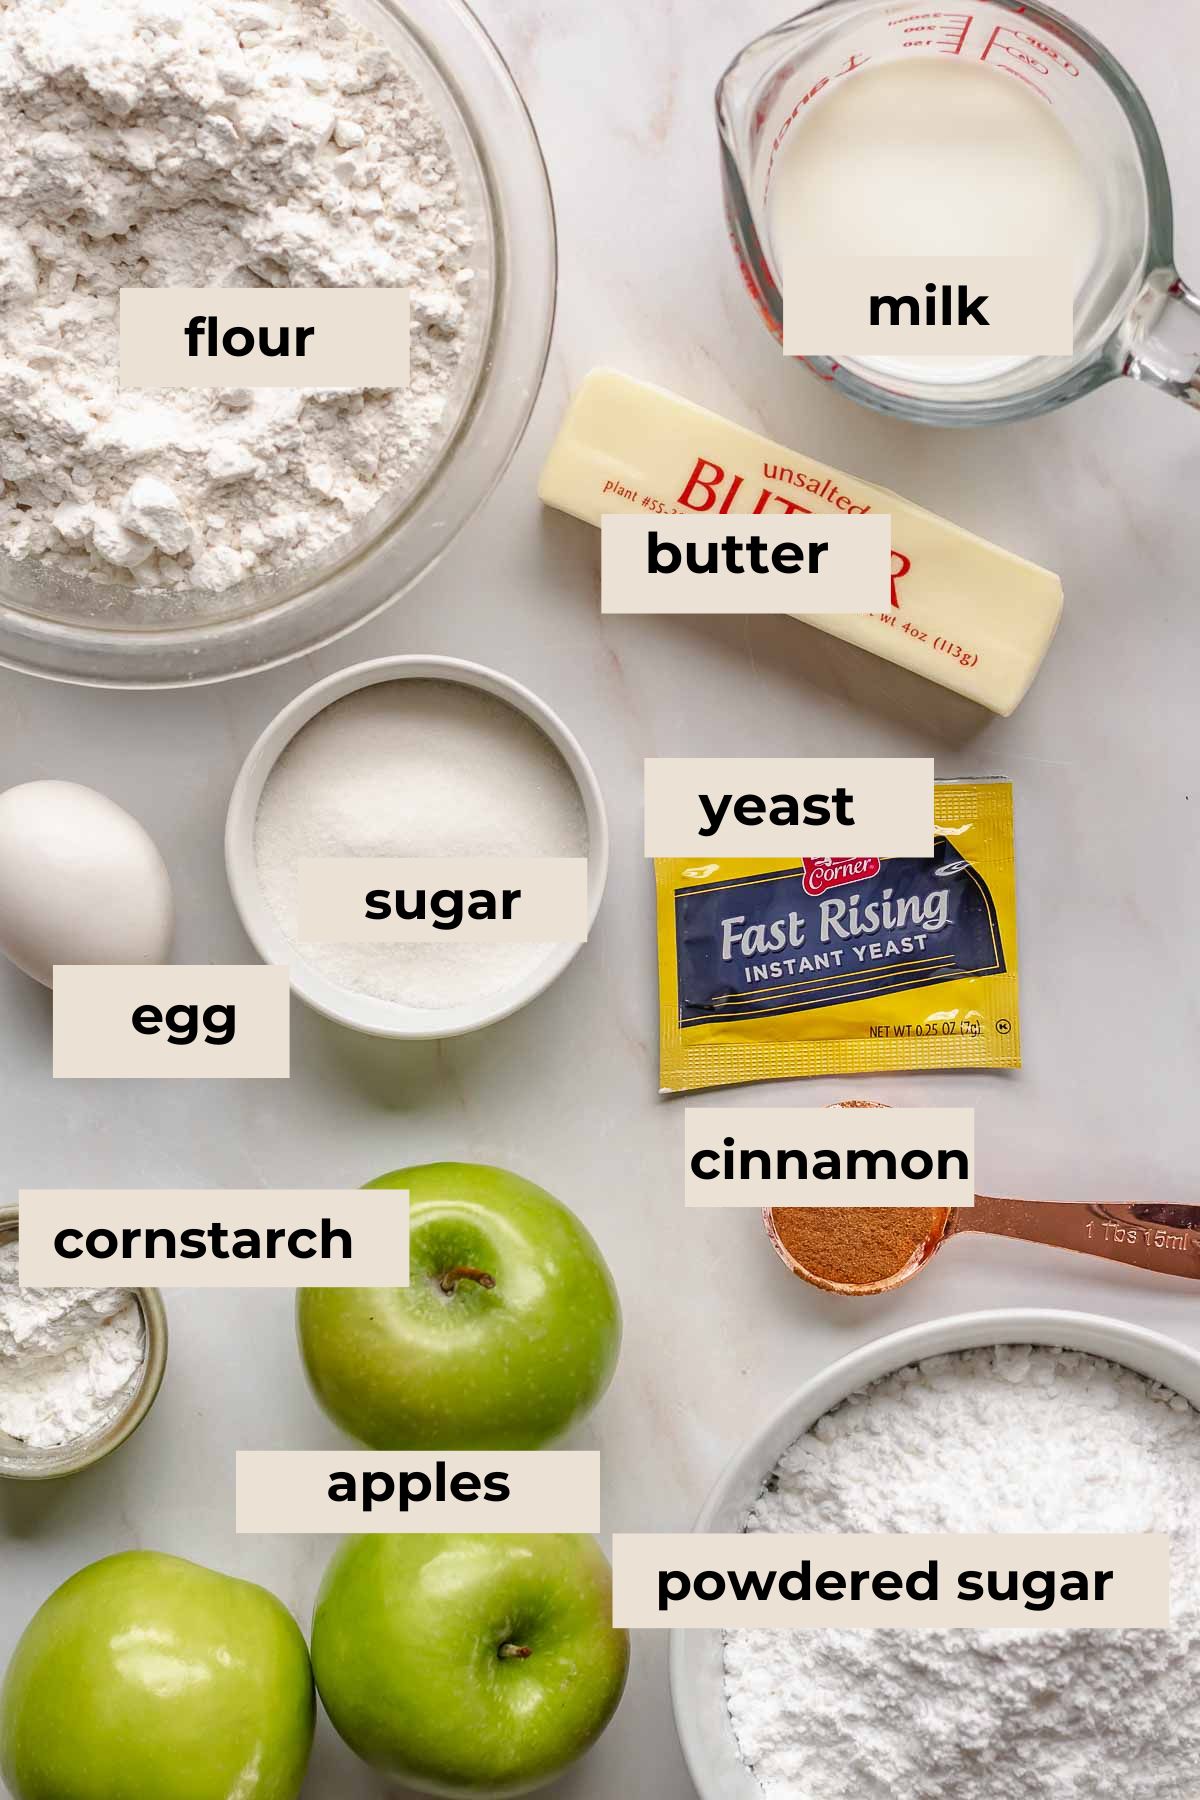 Ingredients for the apple fritter donuts.